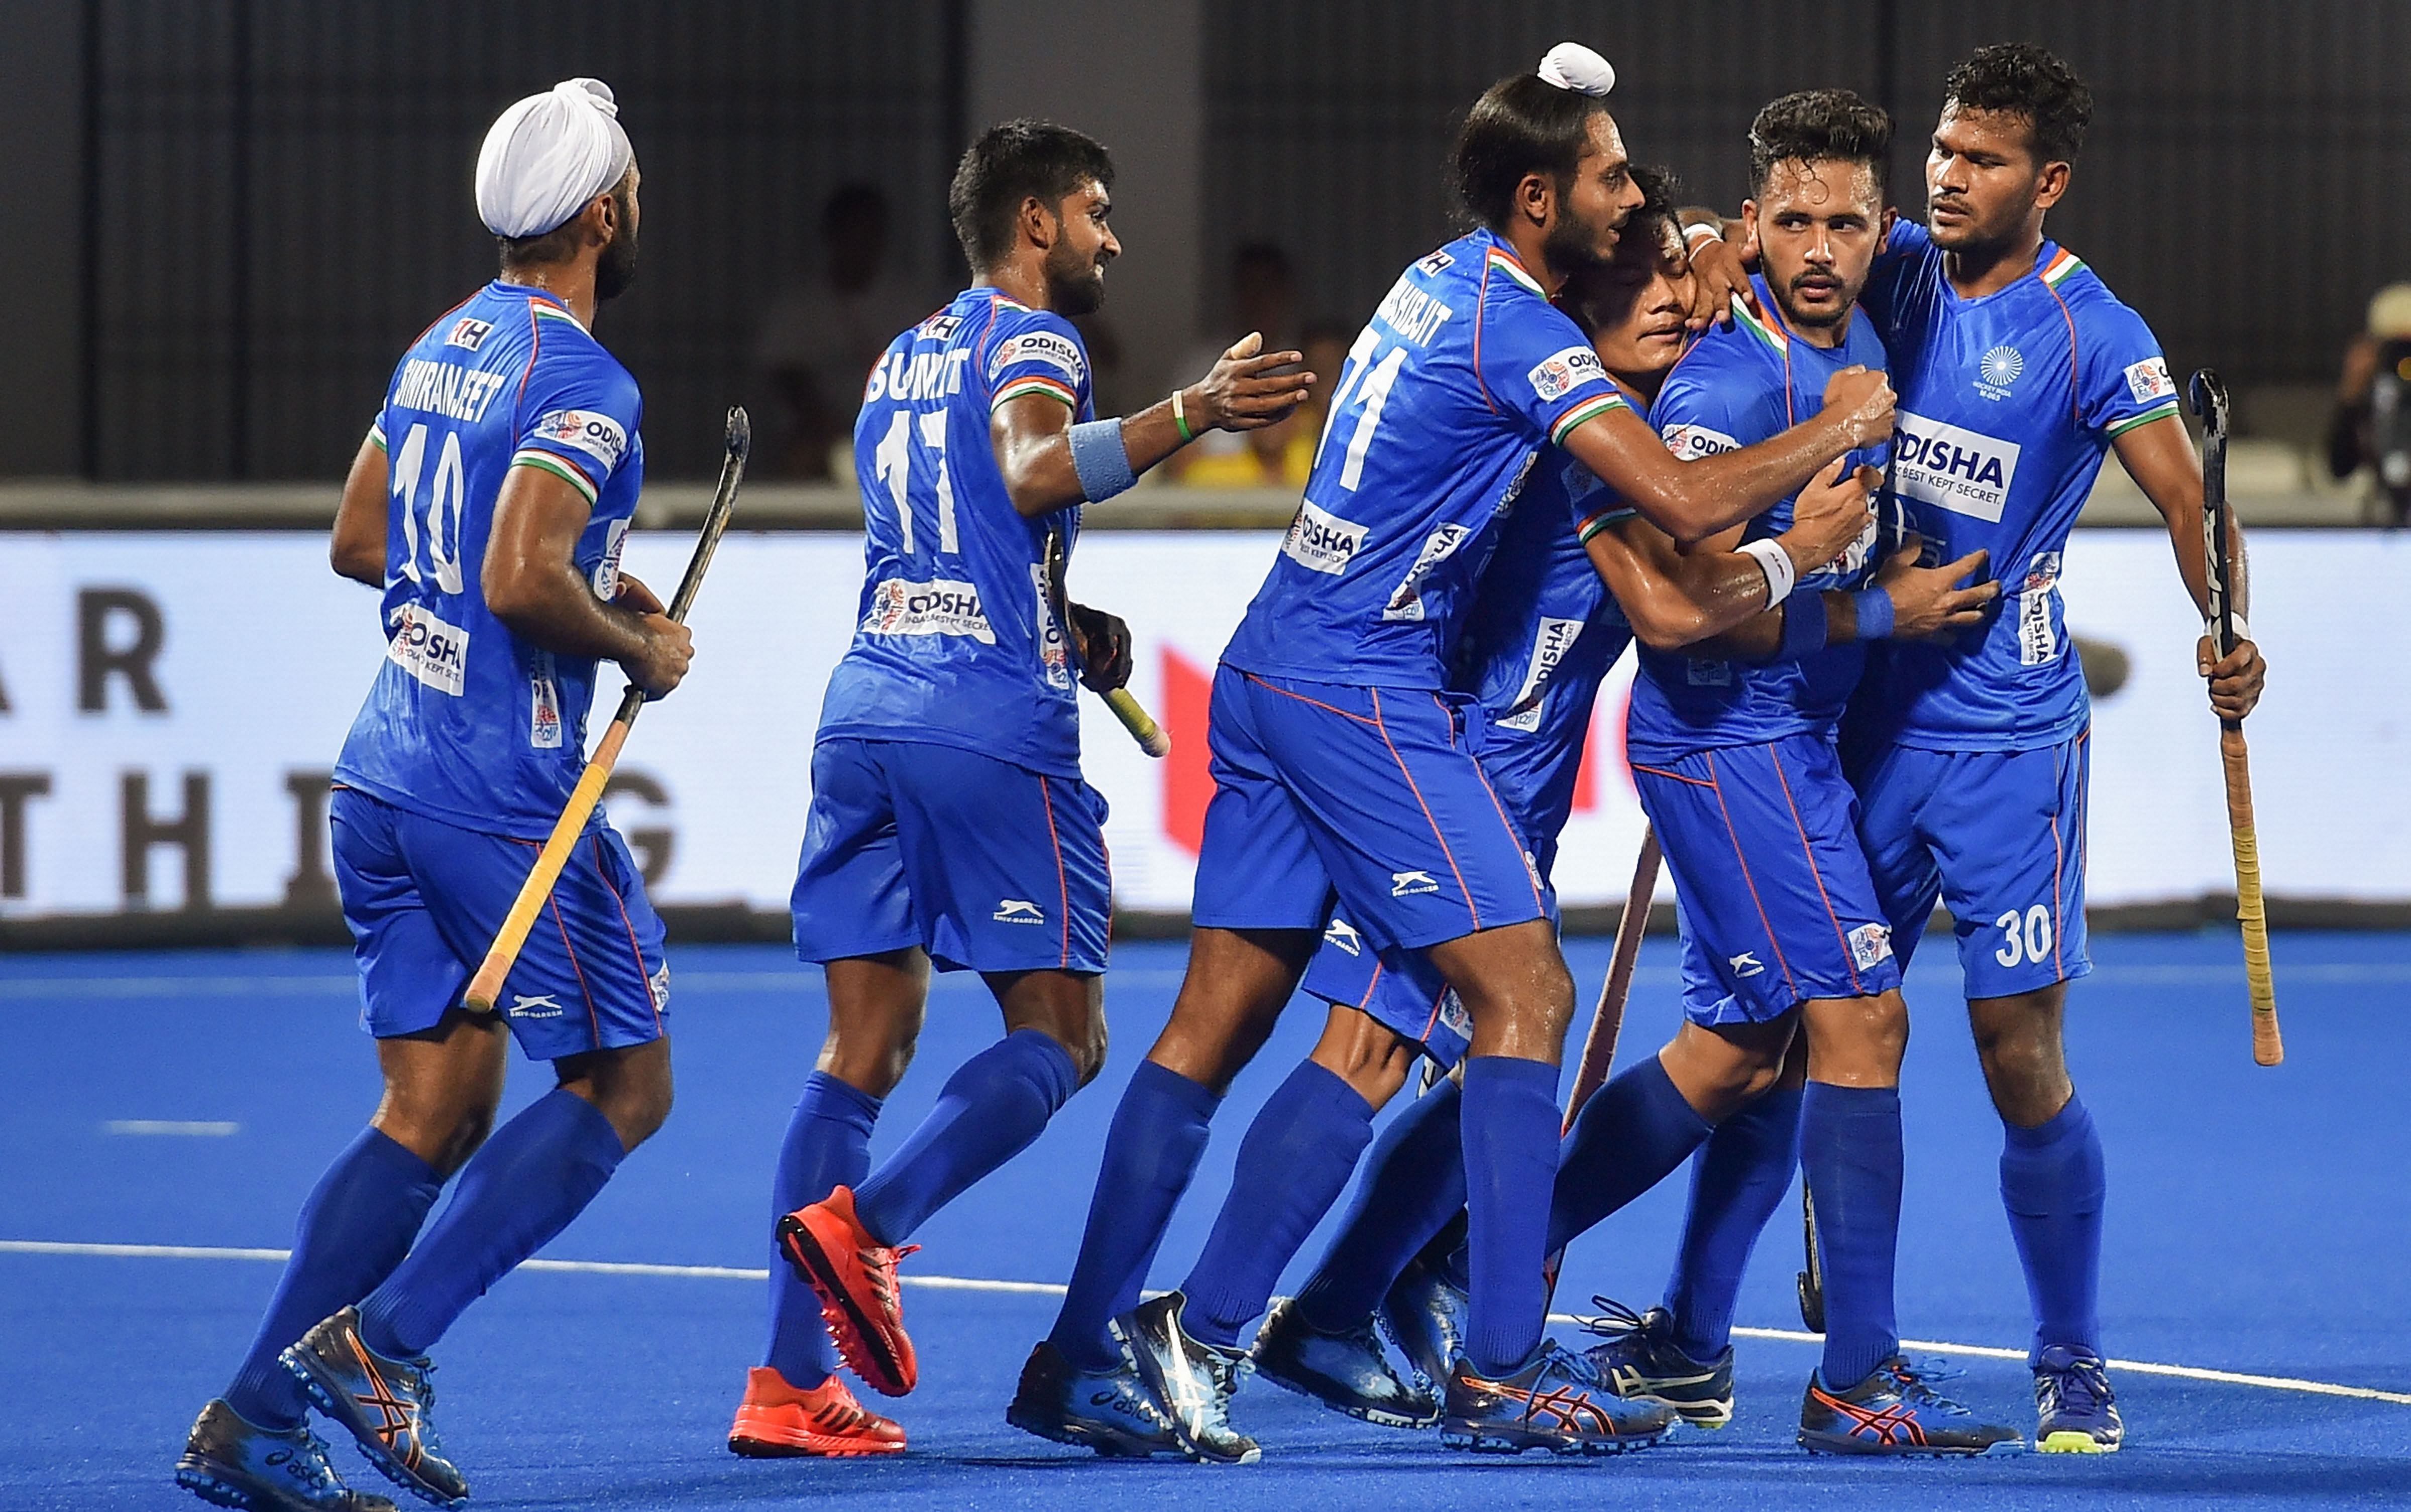 Dragflicker Harmanpreet Singh yet again scored a brace as Indian men's hockey team thrashed Spain 5-1 for their third consecutive win. (PTI Photo)